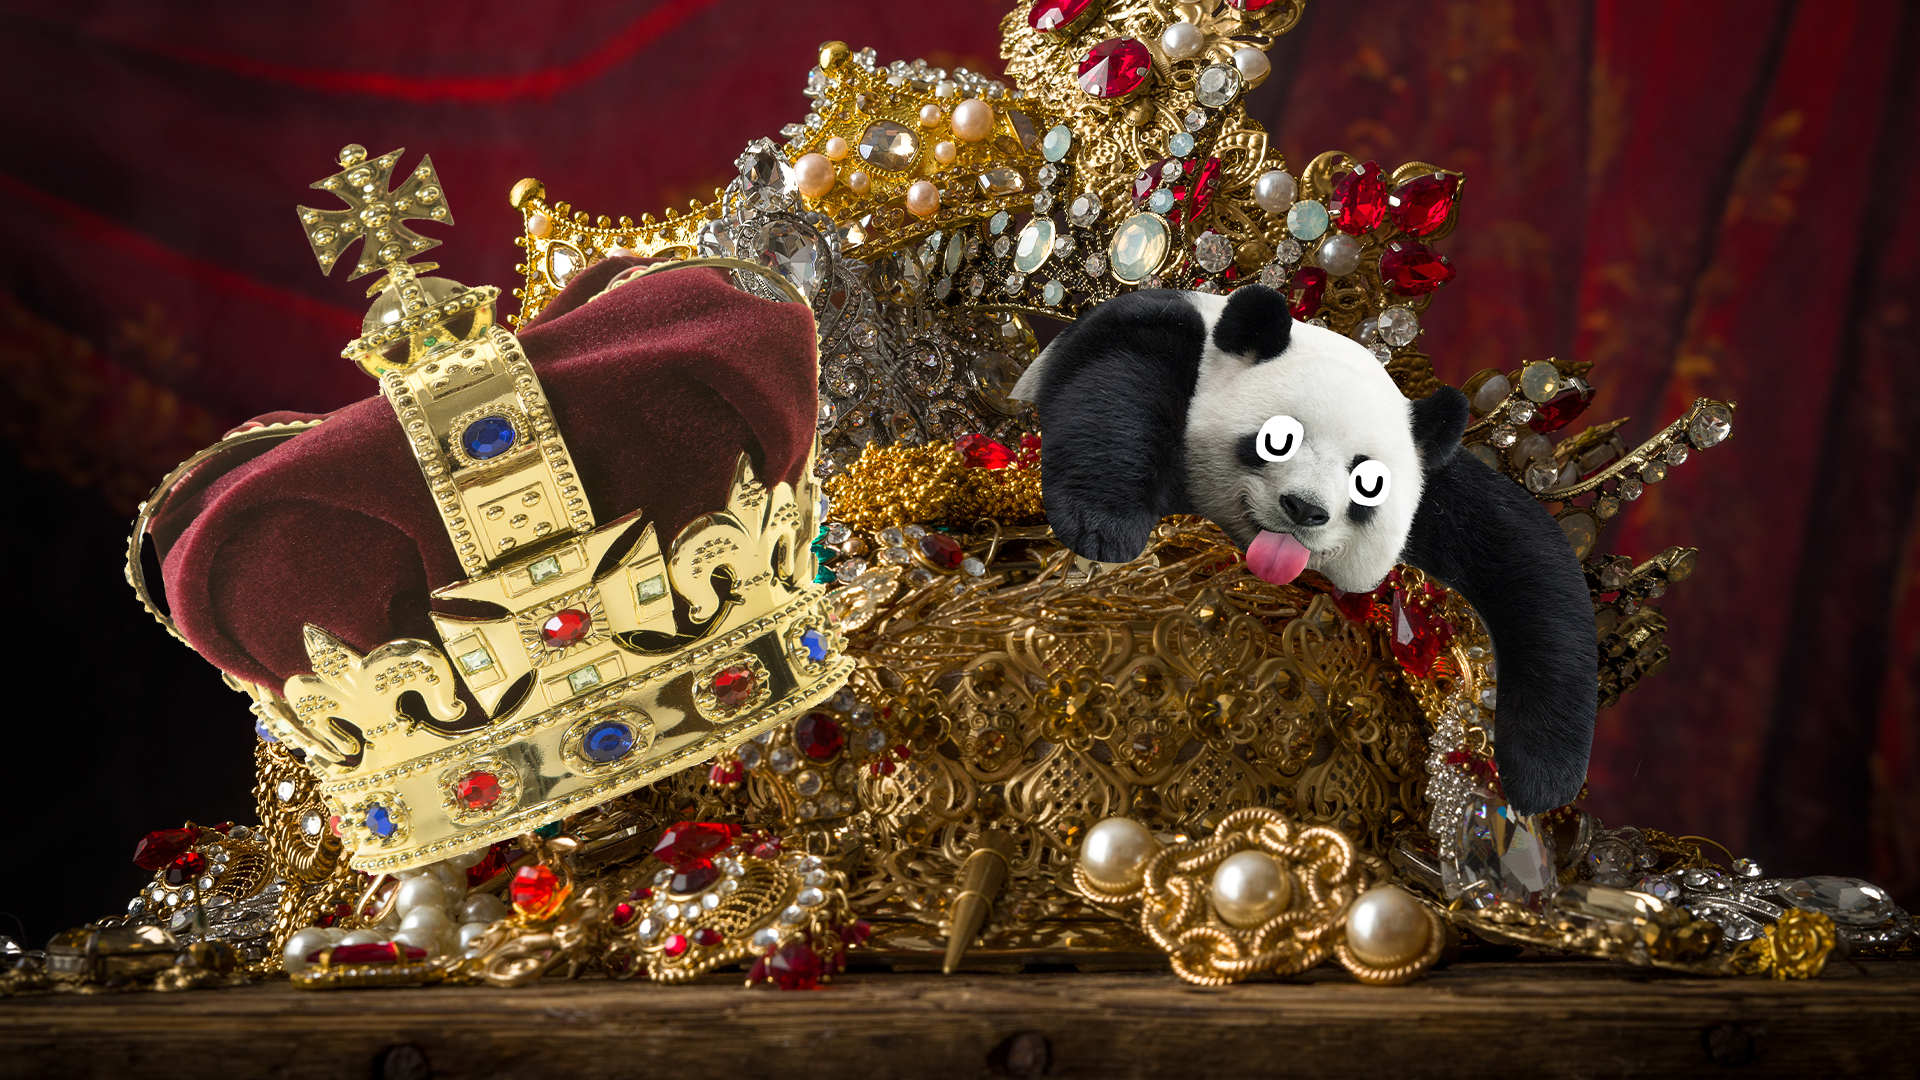 Pile of treasure and a derpy panda